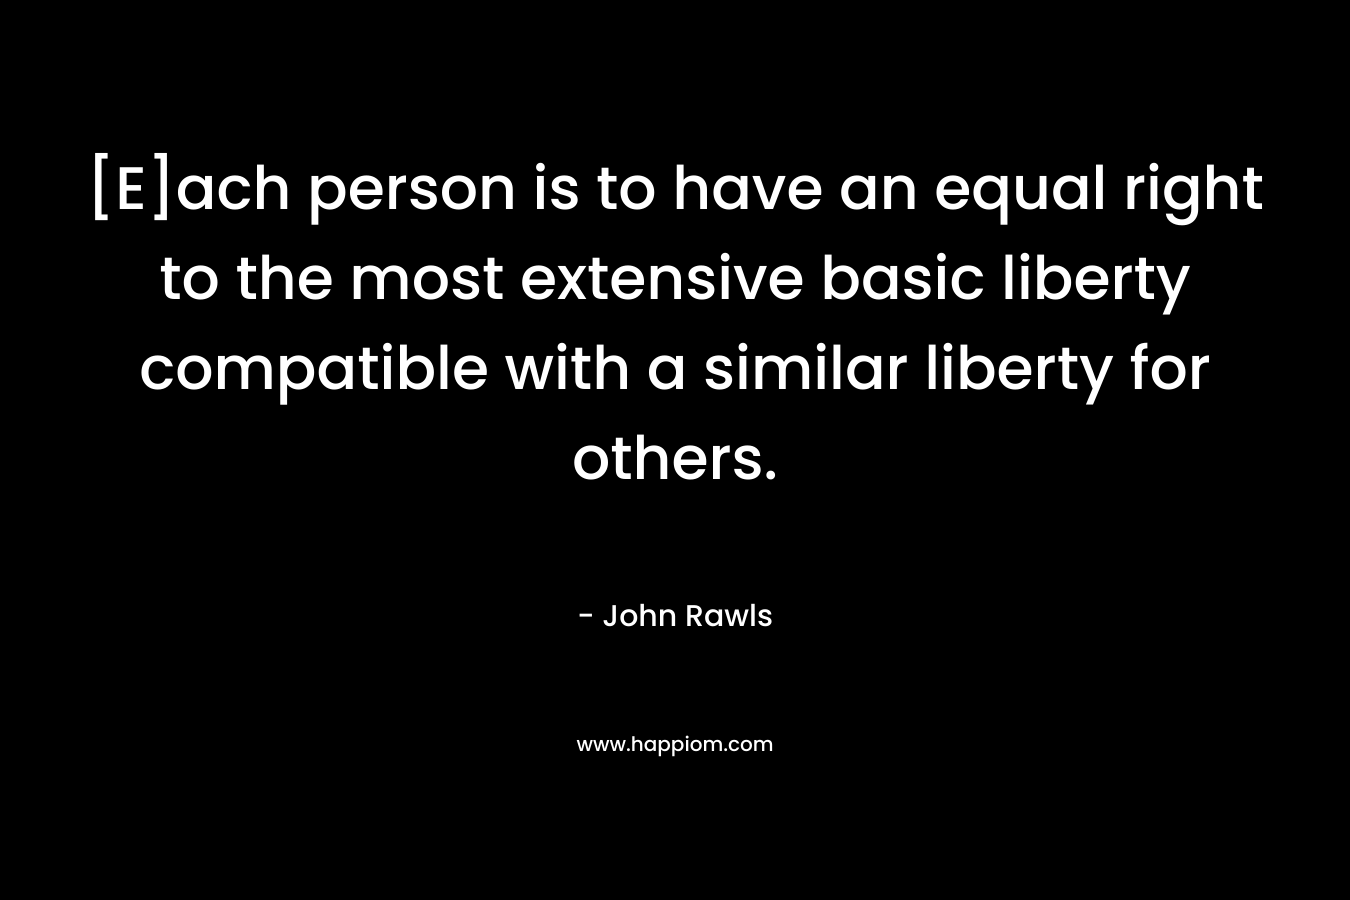 [E]ach person is to have an equal right to the most extensive basic liberty compatible with a similar liberty for others.